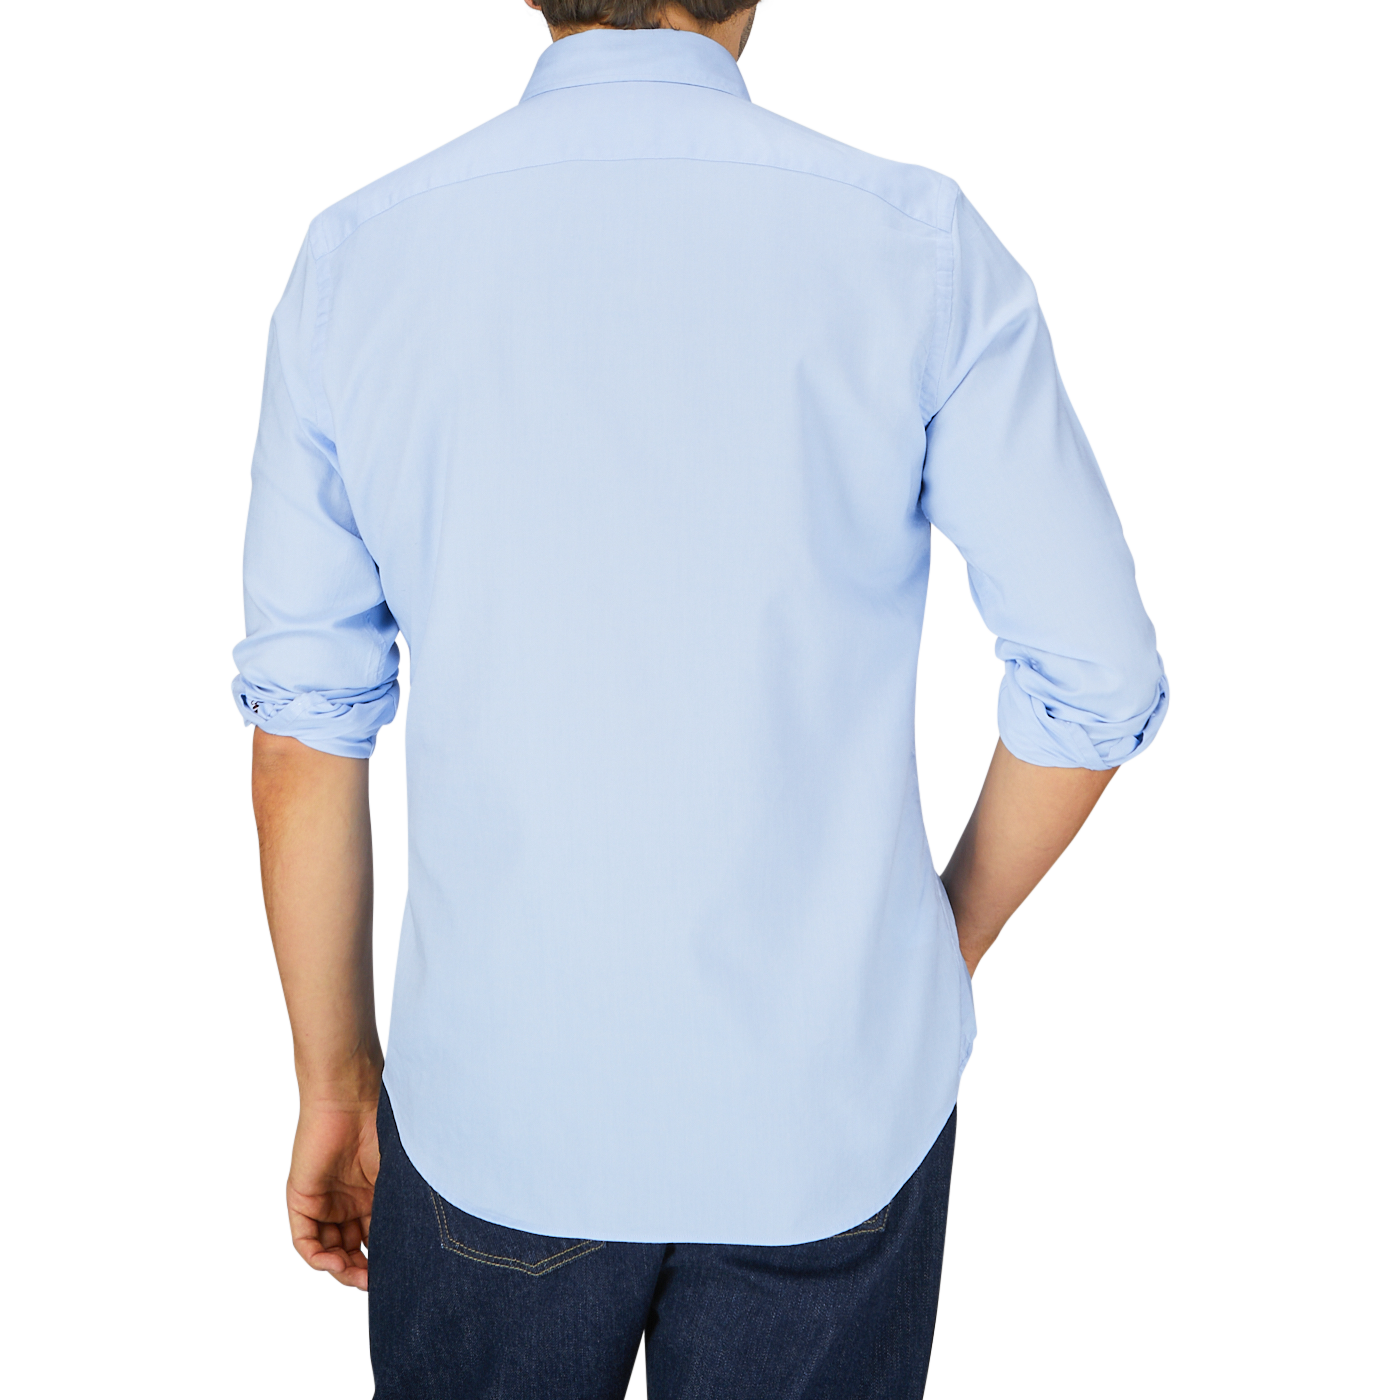 Man seen from behind wearing a Glanshirt light blue pure cotton oxford shirt with mother-of-pearl buttons and dark blue jeans.